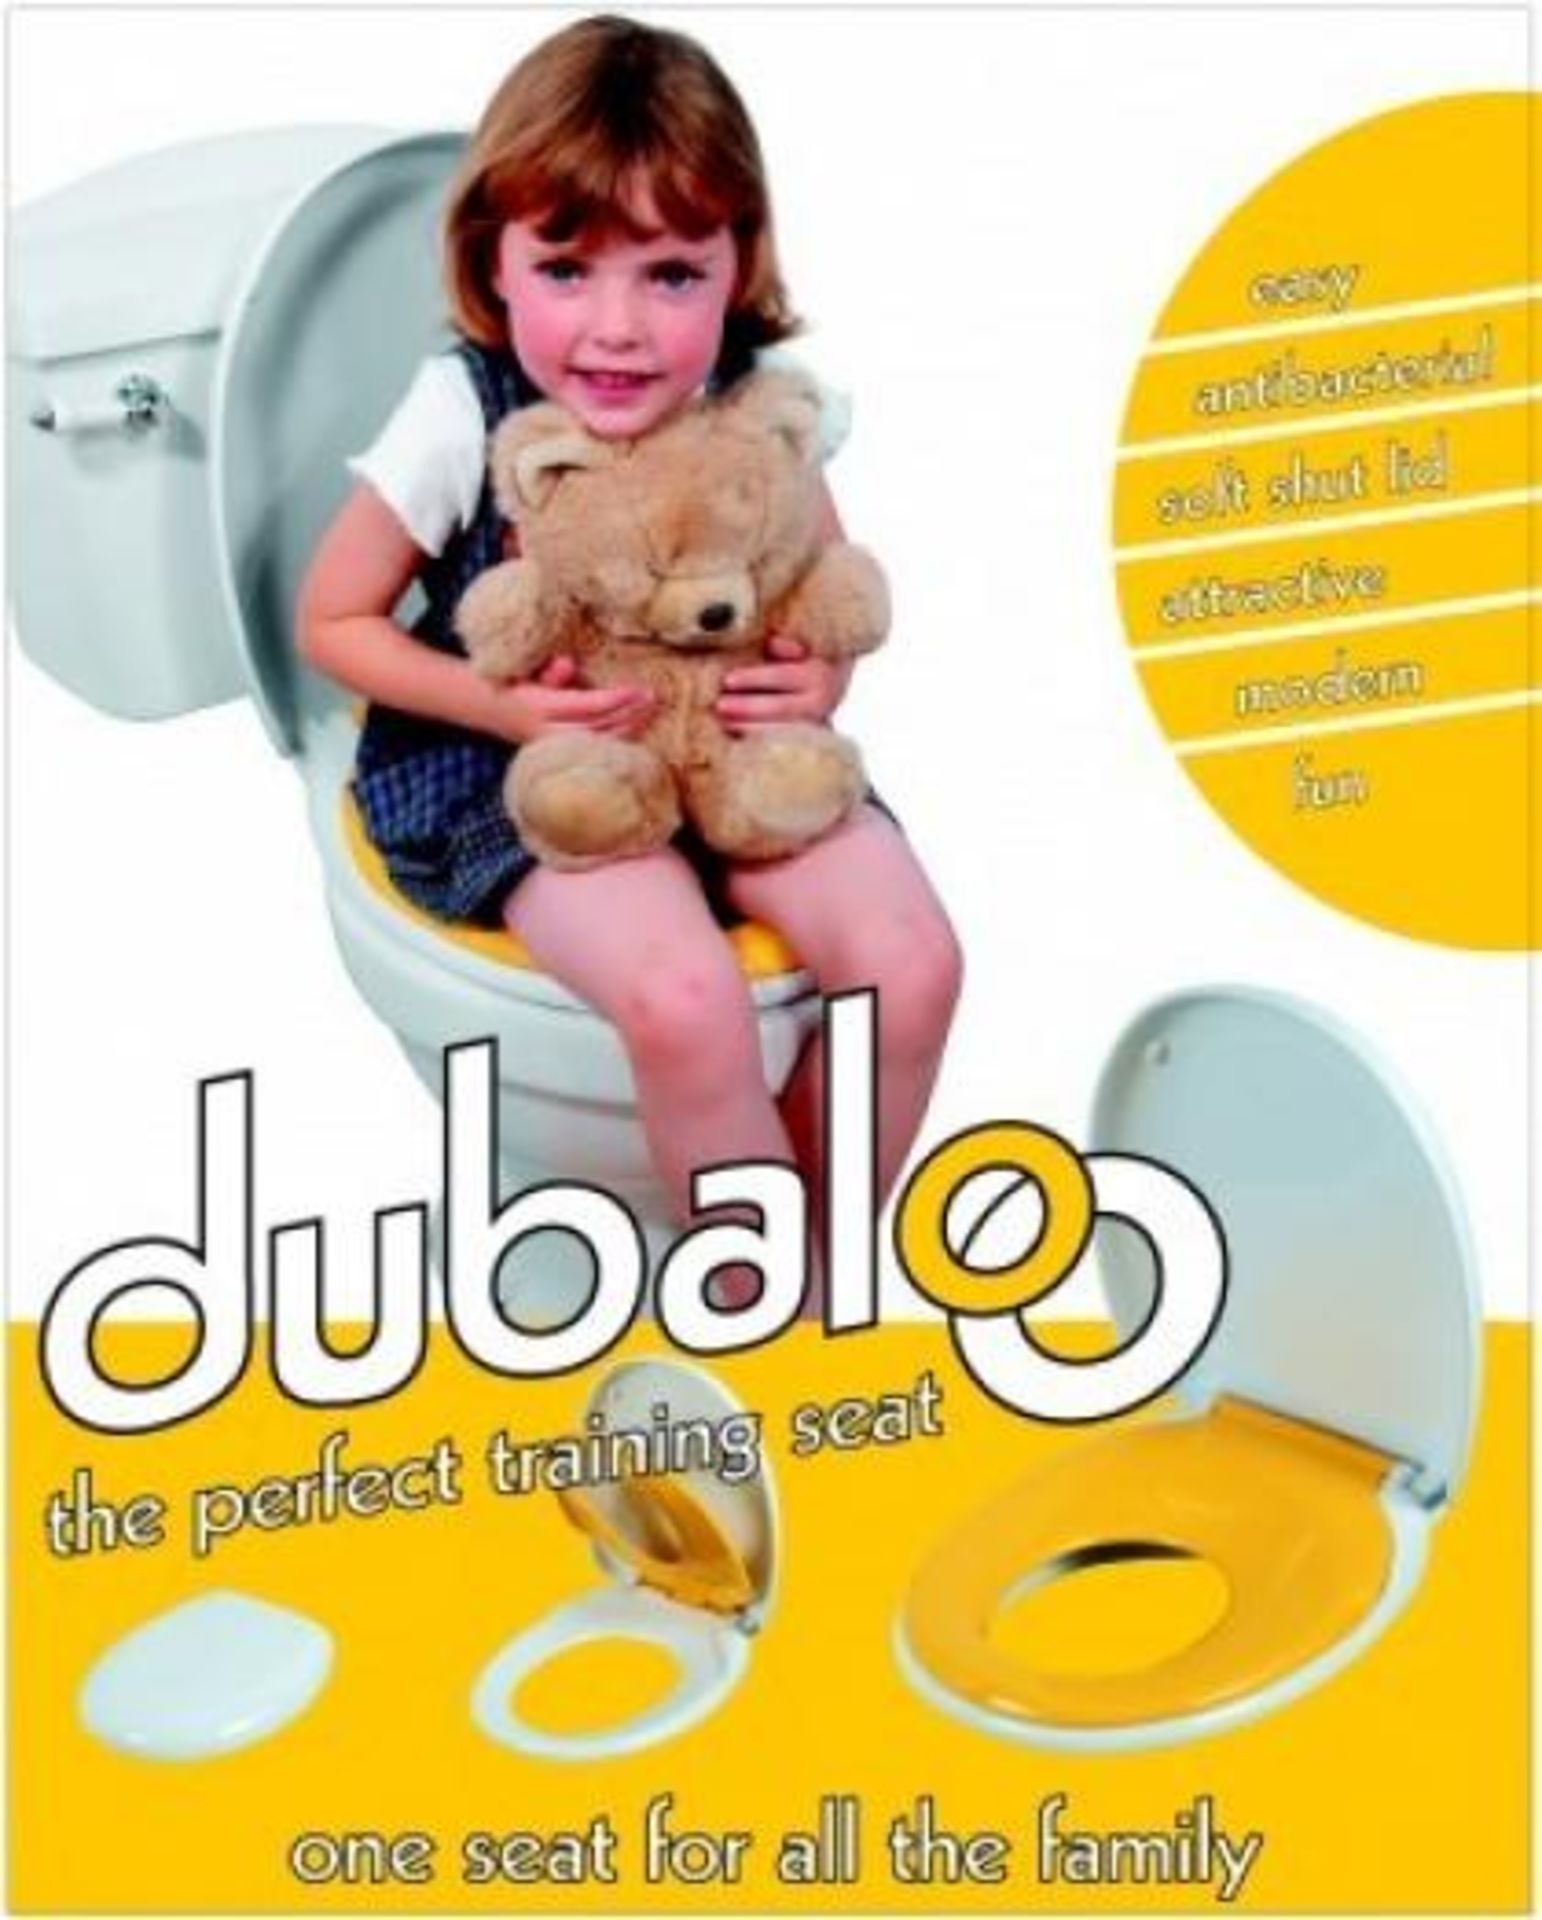 1 x Dubaloo 2 in 1 Family Training Toilet Seat - One Seat For All The Family - Full Size Toilet Seat - Image 7 of 7